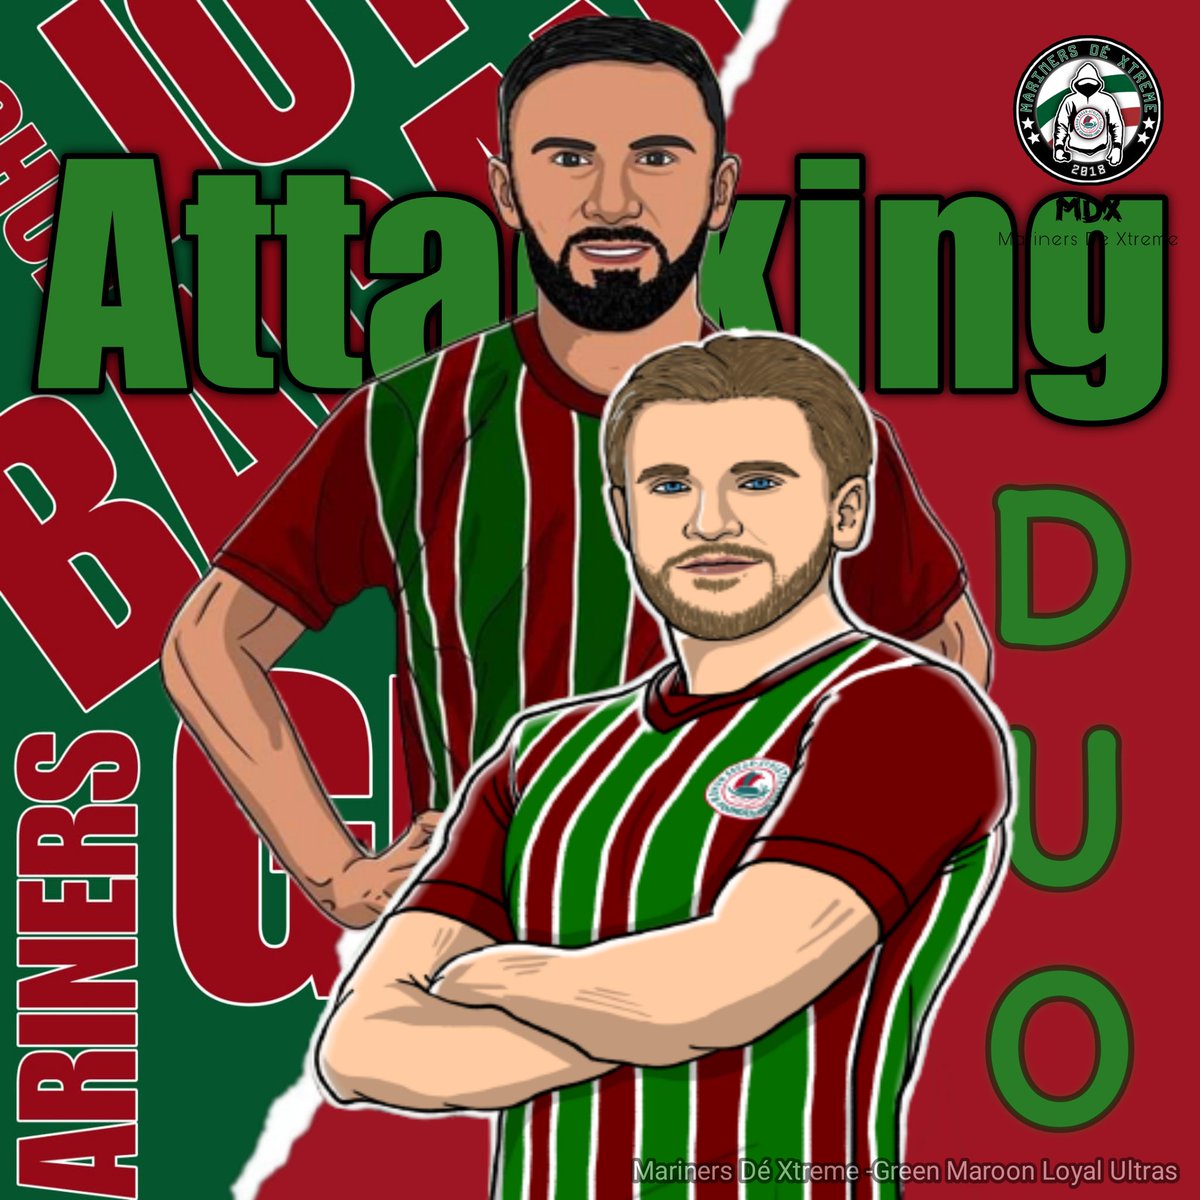 High ambition from  @mohunbagansg  management 💚♥️

With @Dimi_Petratos  the new Attacking Duo @ArmandoSadiku and @Jasoncummings35 will  surely combine as one of the best attacking upfronts  for @Mohun_Bagan in @IndSuperLeague and @AFCCup

What is your thoughts #Mariners…